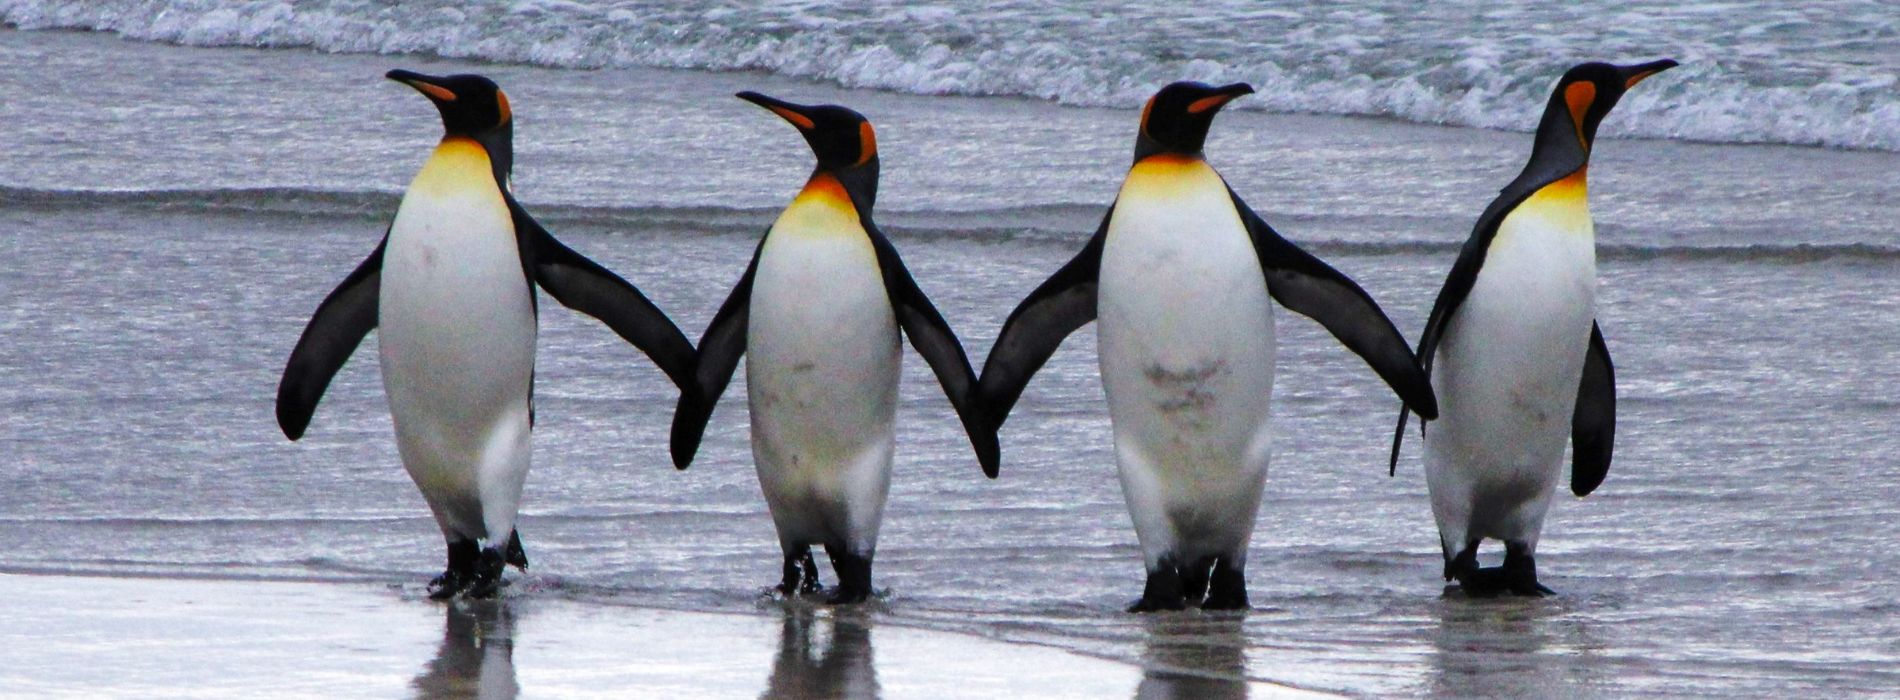 What do penguins do all day?